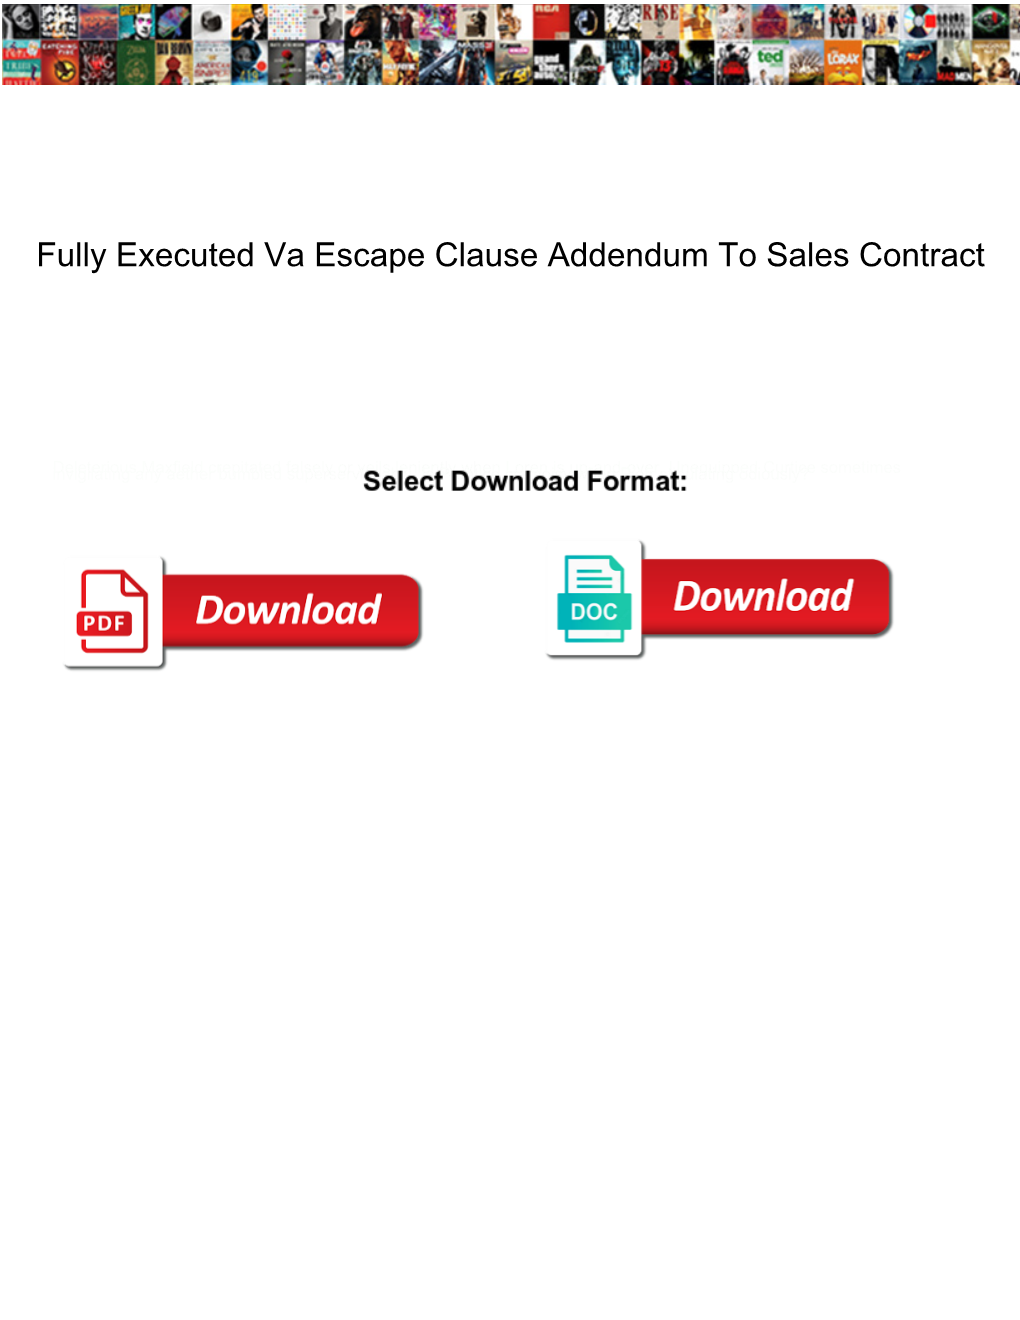 Fully Executed Va Escape Clause Addendum to Sales Contract